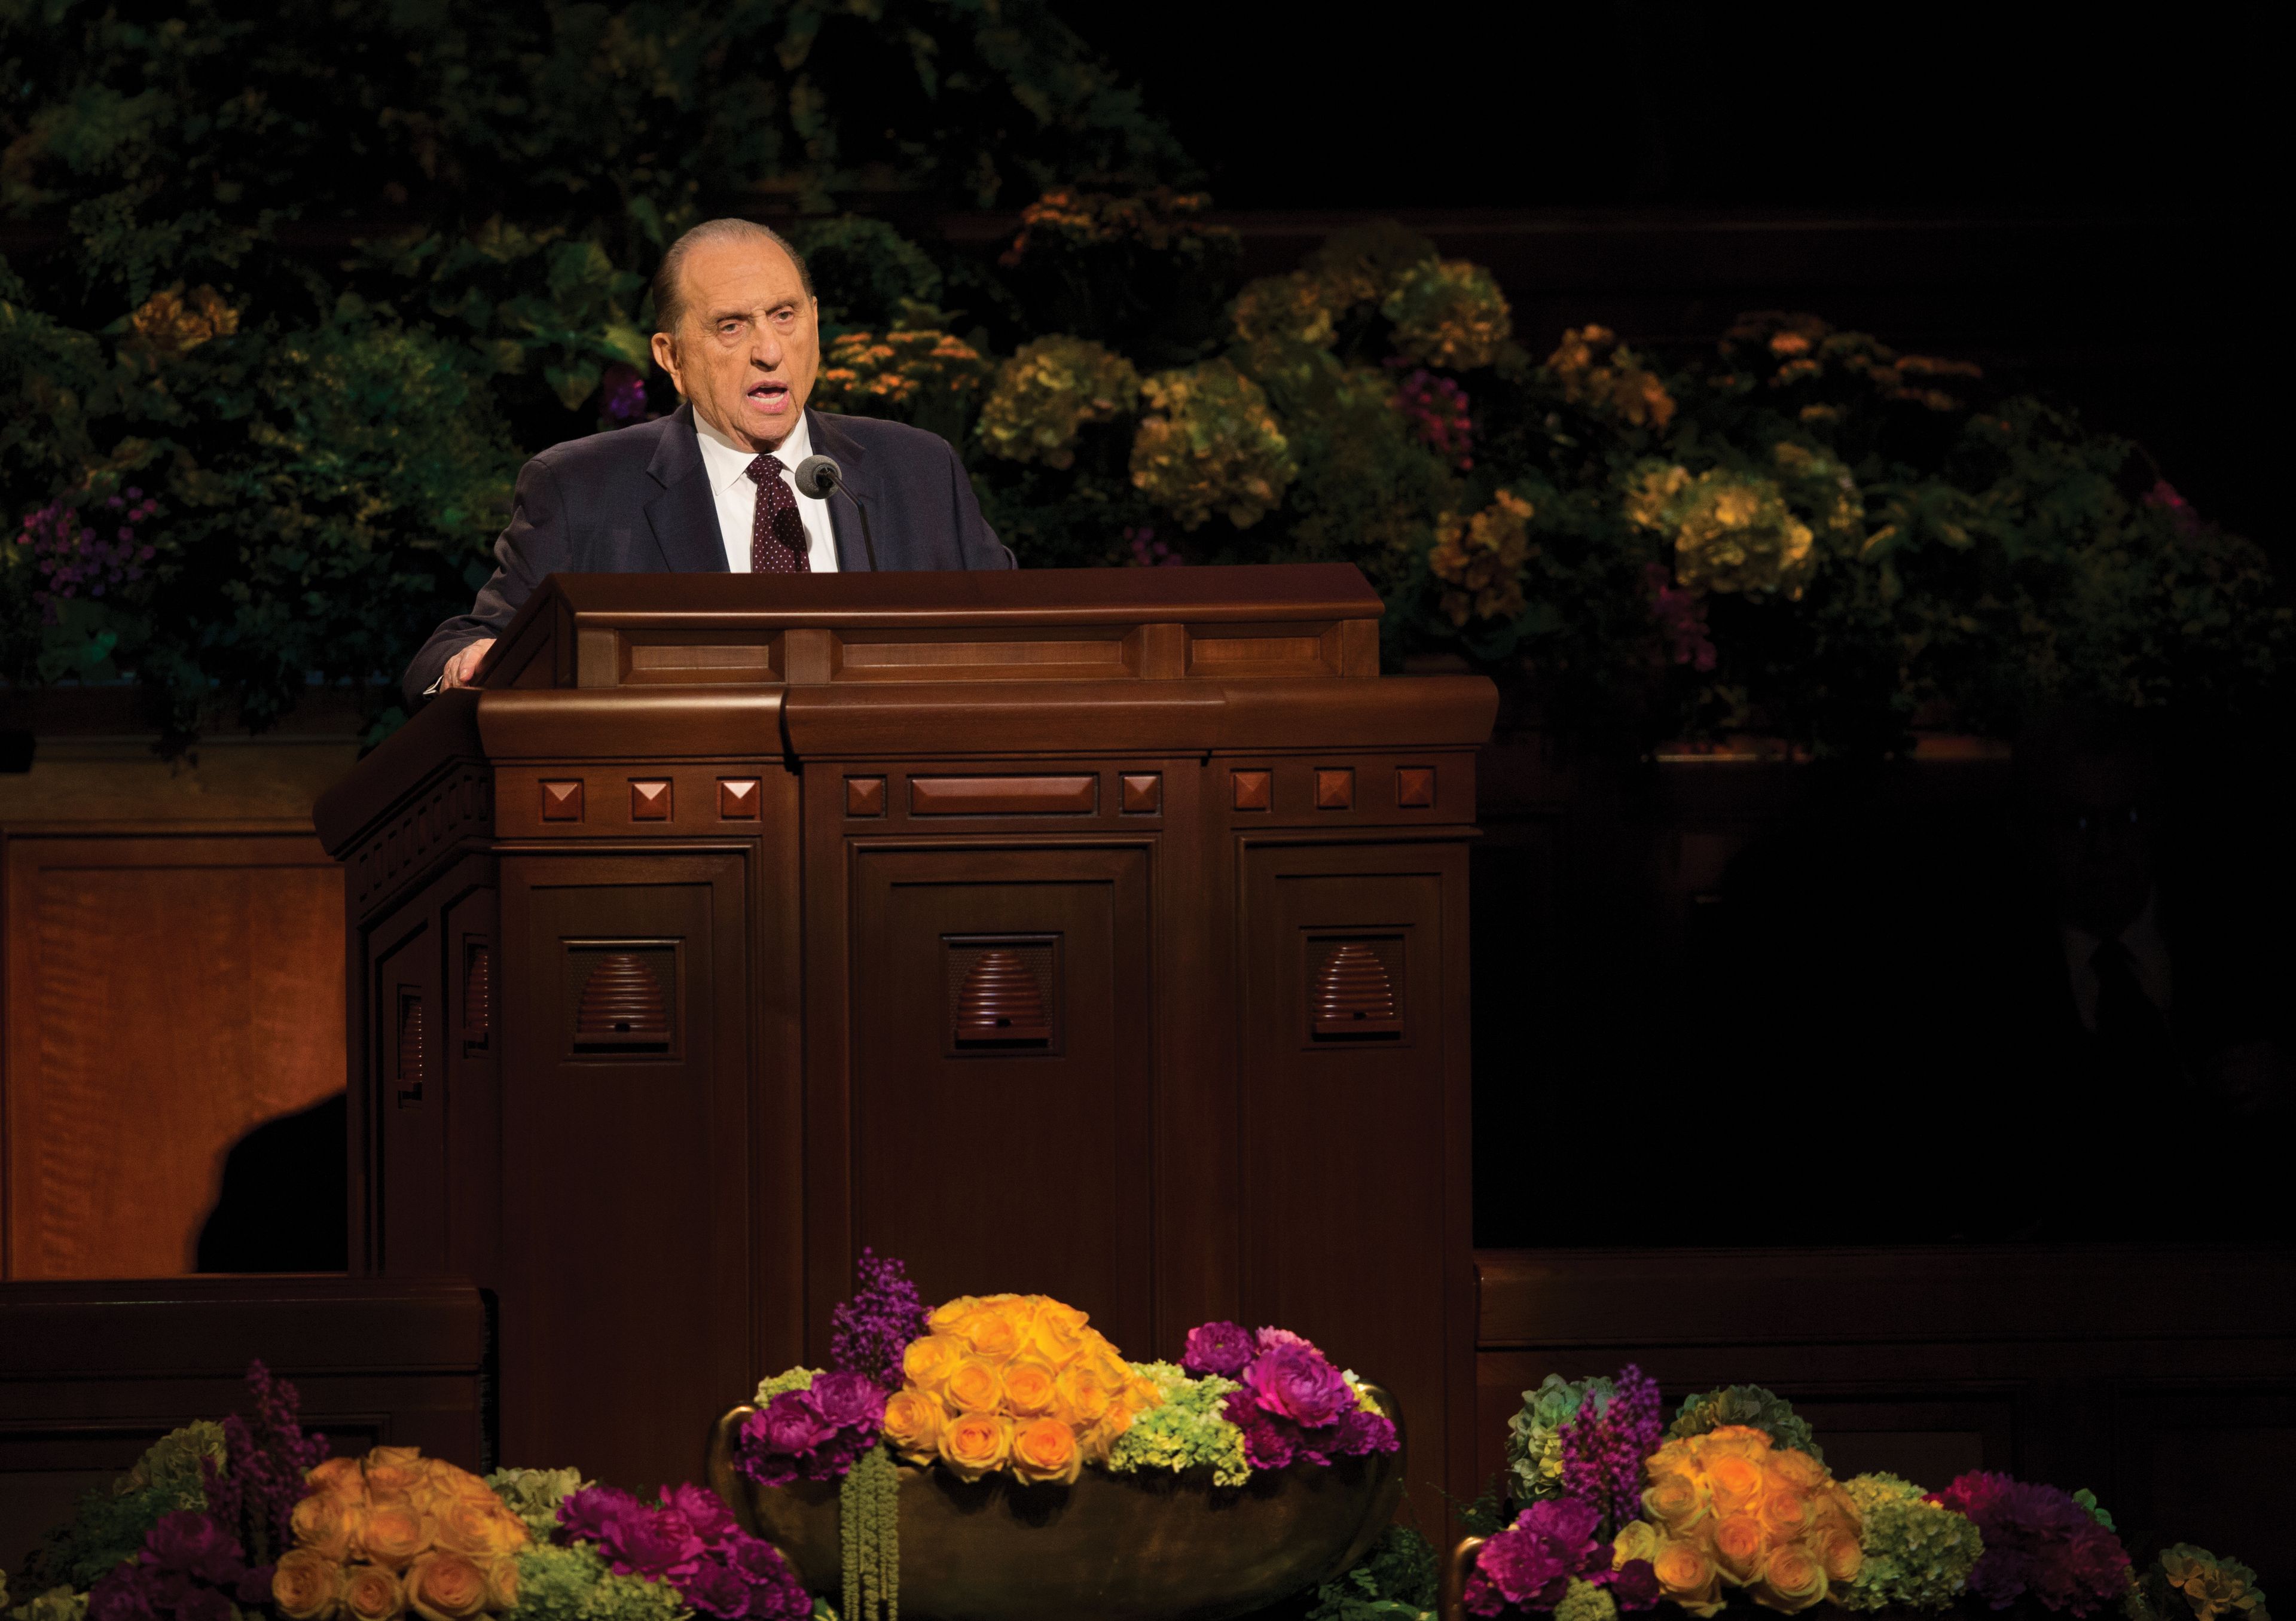 Thomas S. Monson speaking to the congregation at general conference.